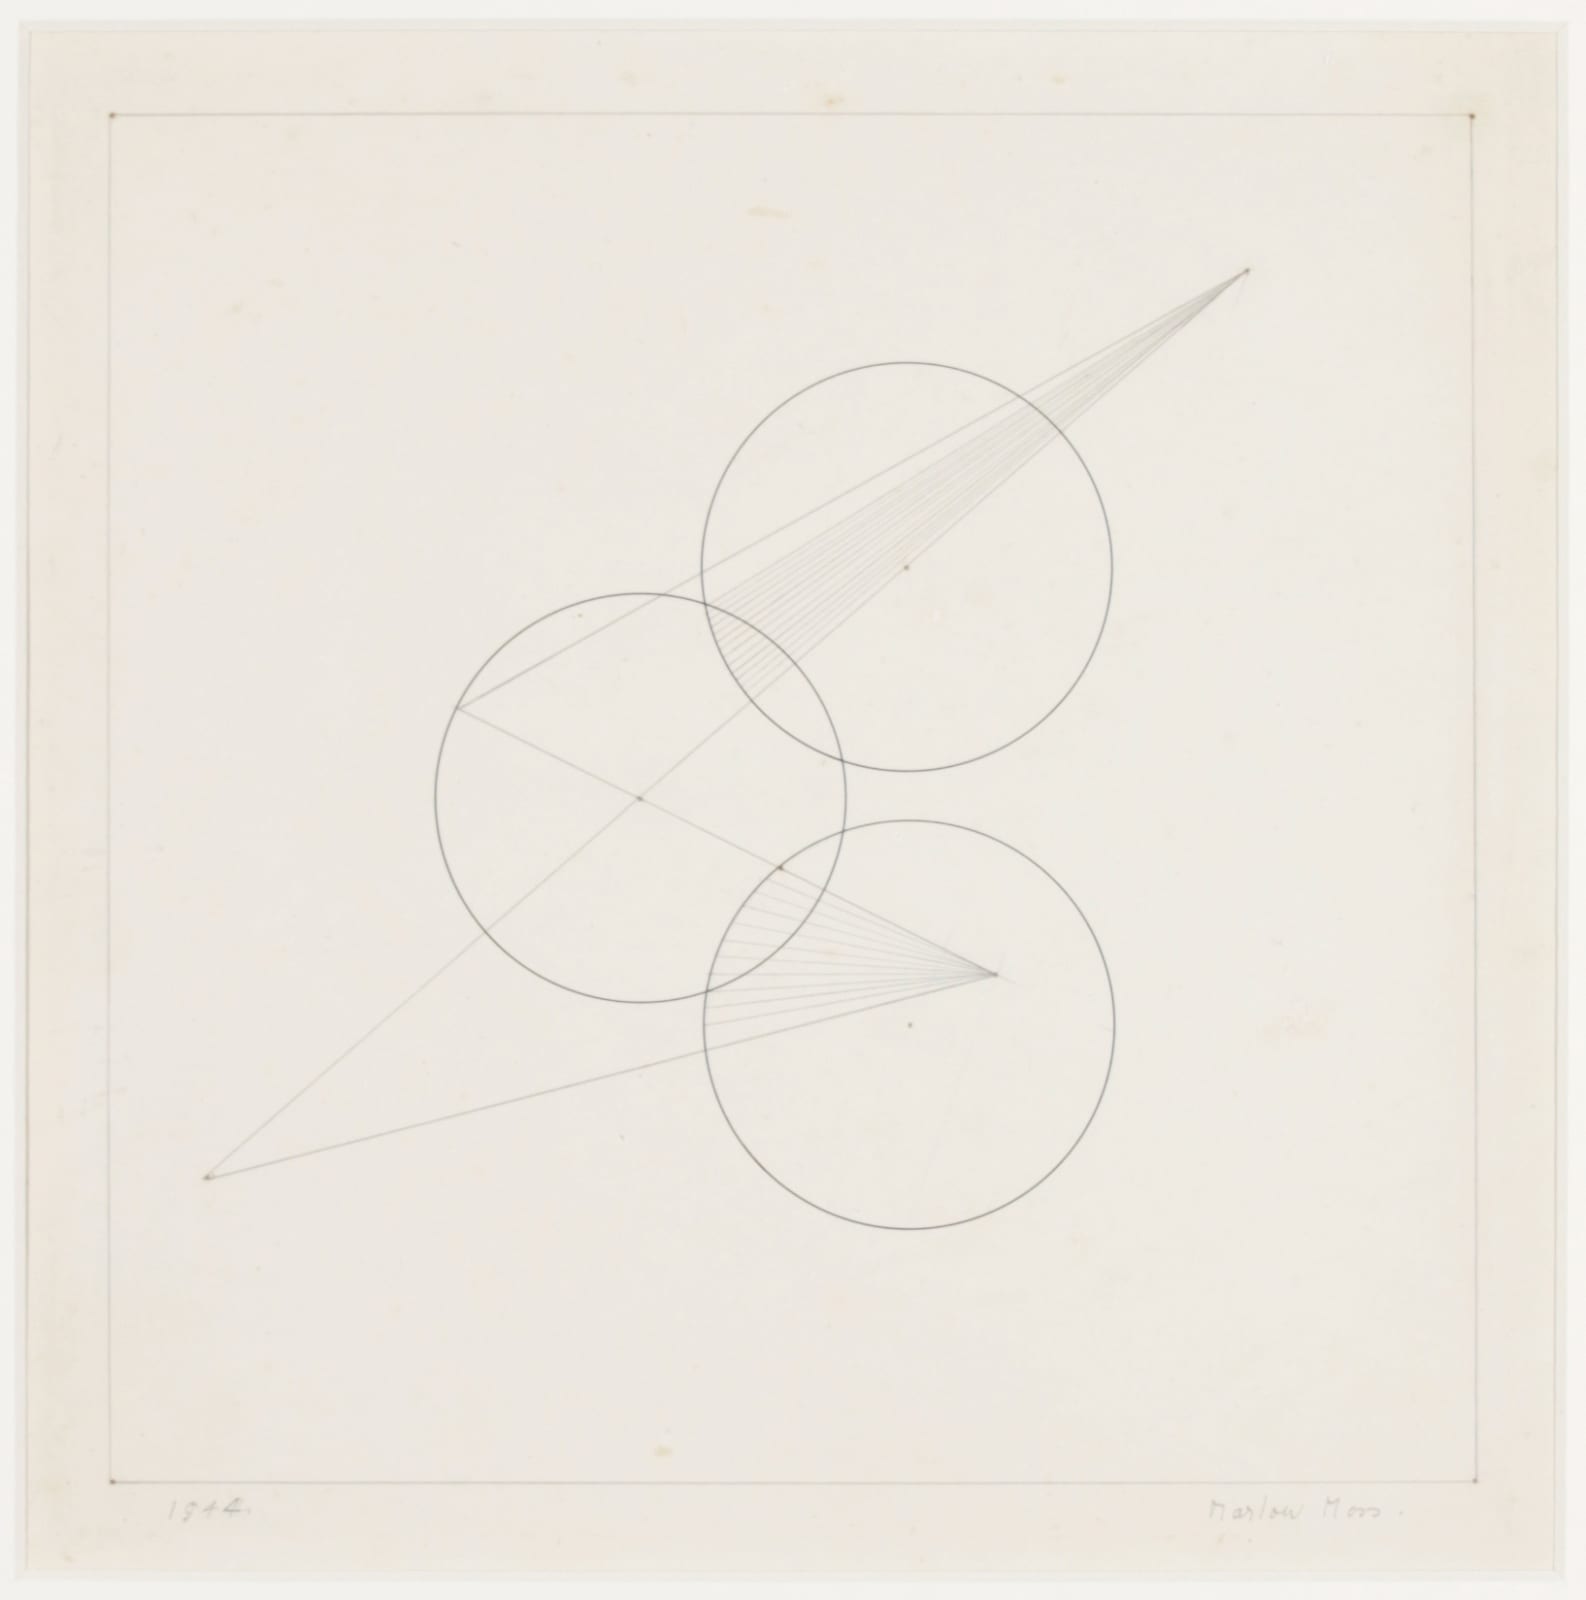 MARLOW MOSS, Work on paper no. 13, 1944